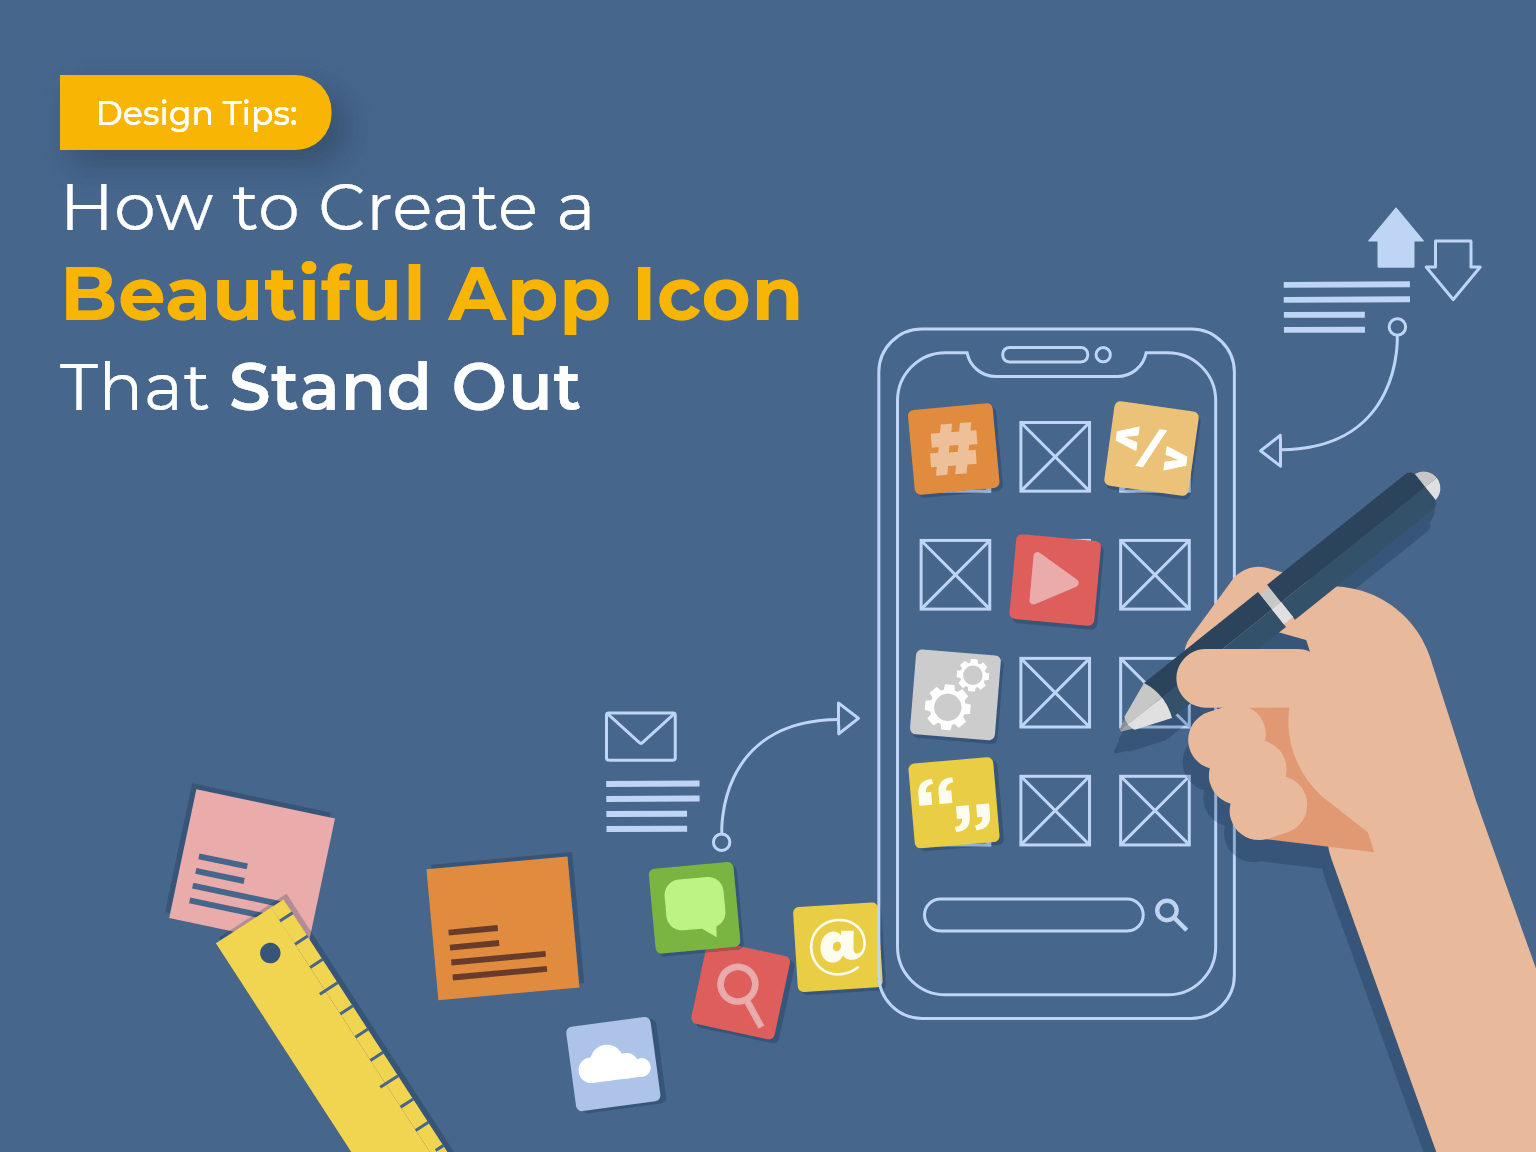 How to Create a Beautiful App Icon That Stand Out: Design Tips